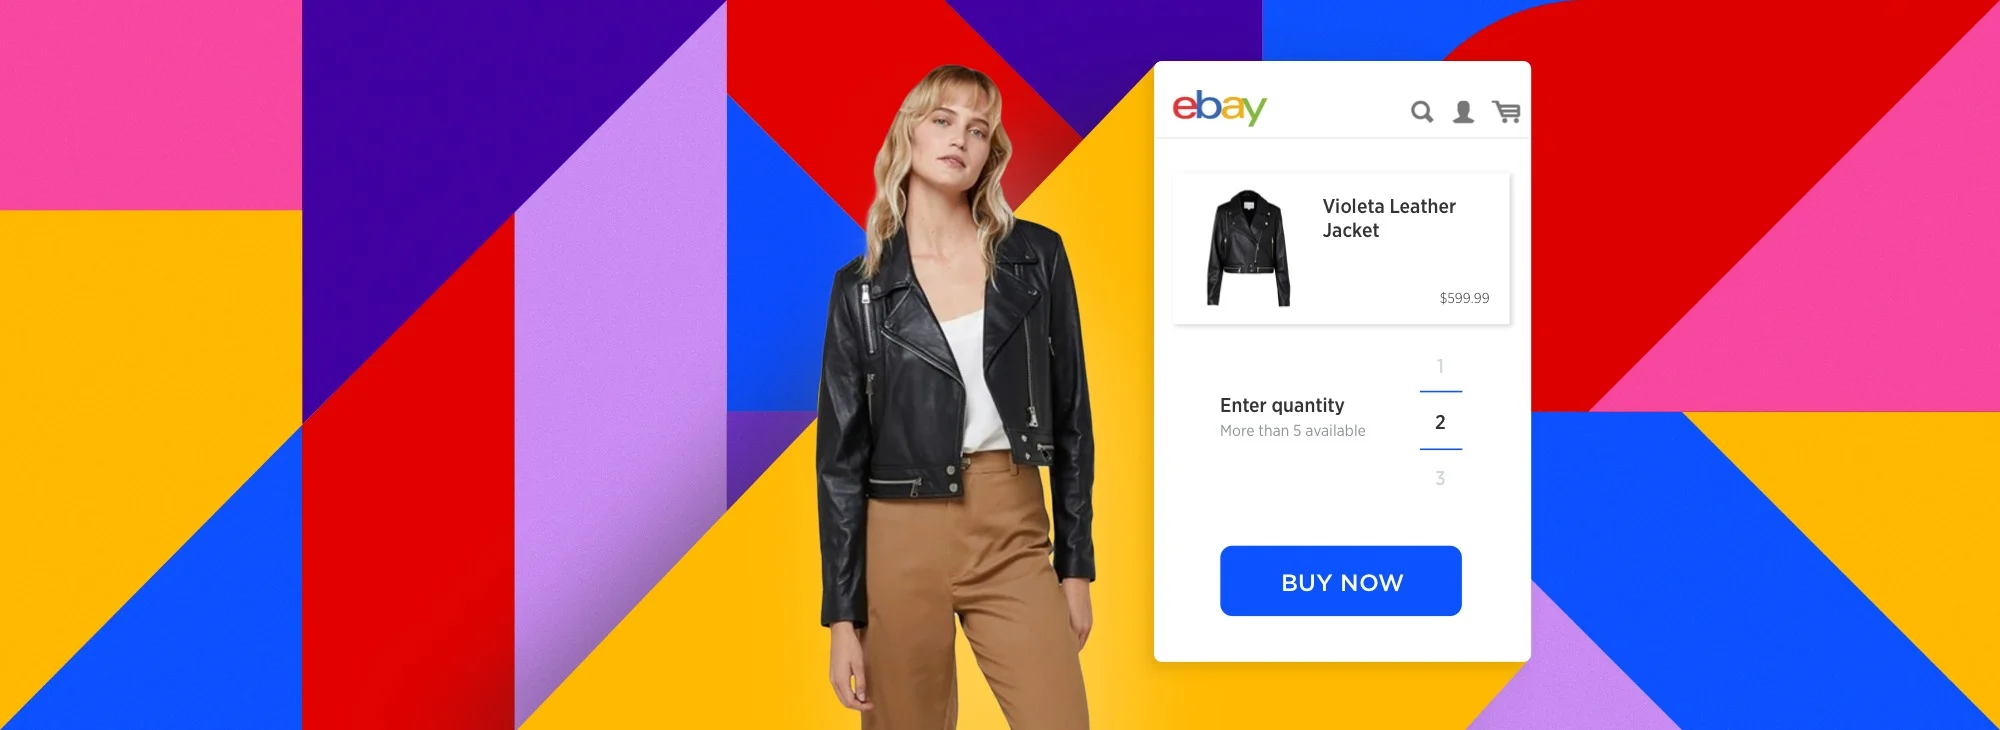 https://cms-wp.bigcommerce.com/wp-content/uploads/2019/10/2019-August-Content-Blog-Headers-Batch-1-Guide-for-How-To-Sell-On-eBay-4858-MT-Copy@1x.jpg